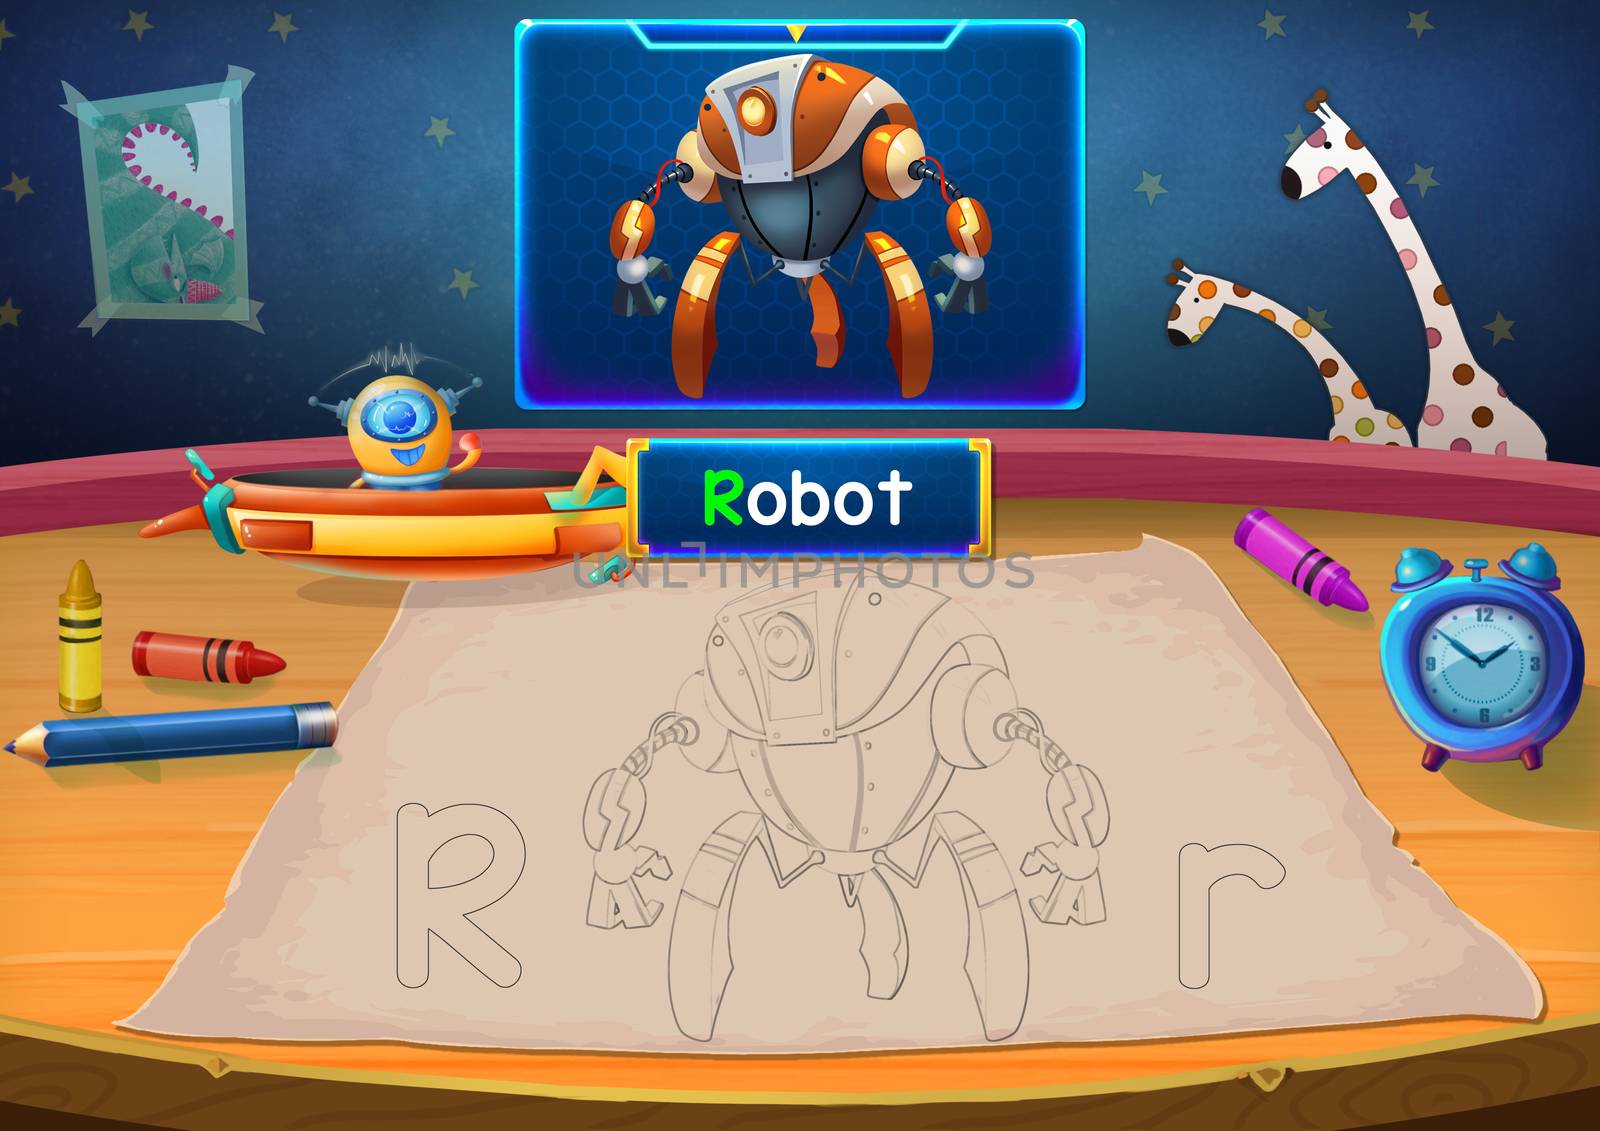 Illustration: Martian Class: R - Robot. The Martian in this picture opens a class for all Aliens. You must follow and use crayons coloring the outlines below. Fantastic Sci-Fi Cartoon Scene Design.